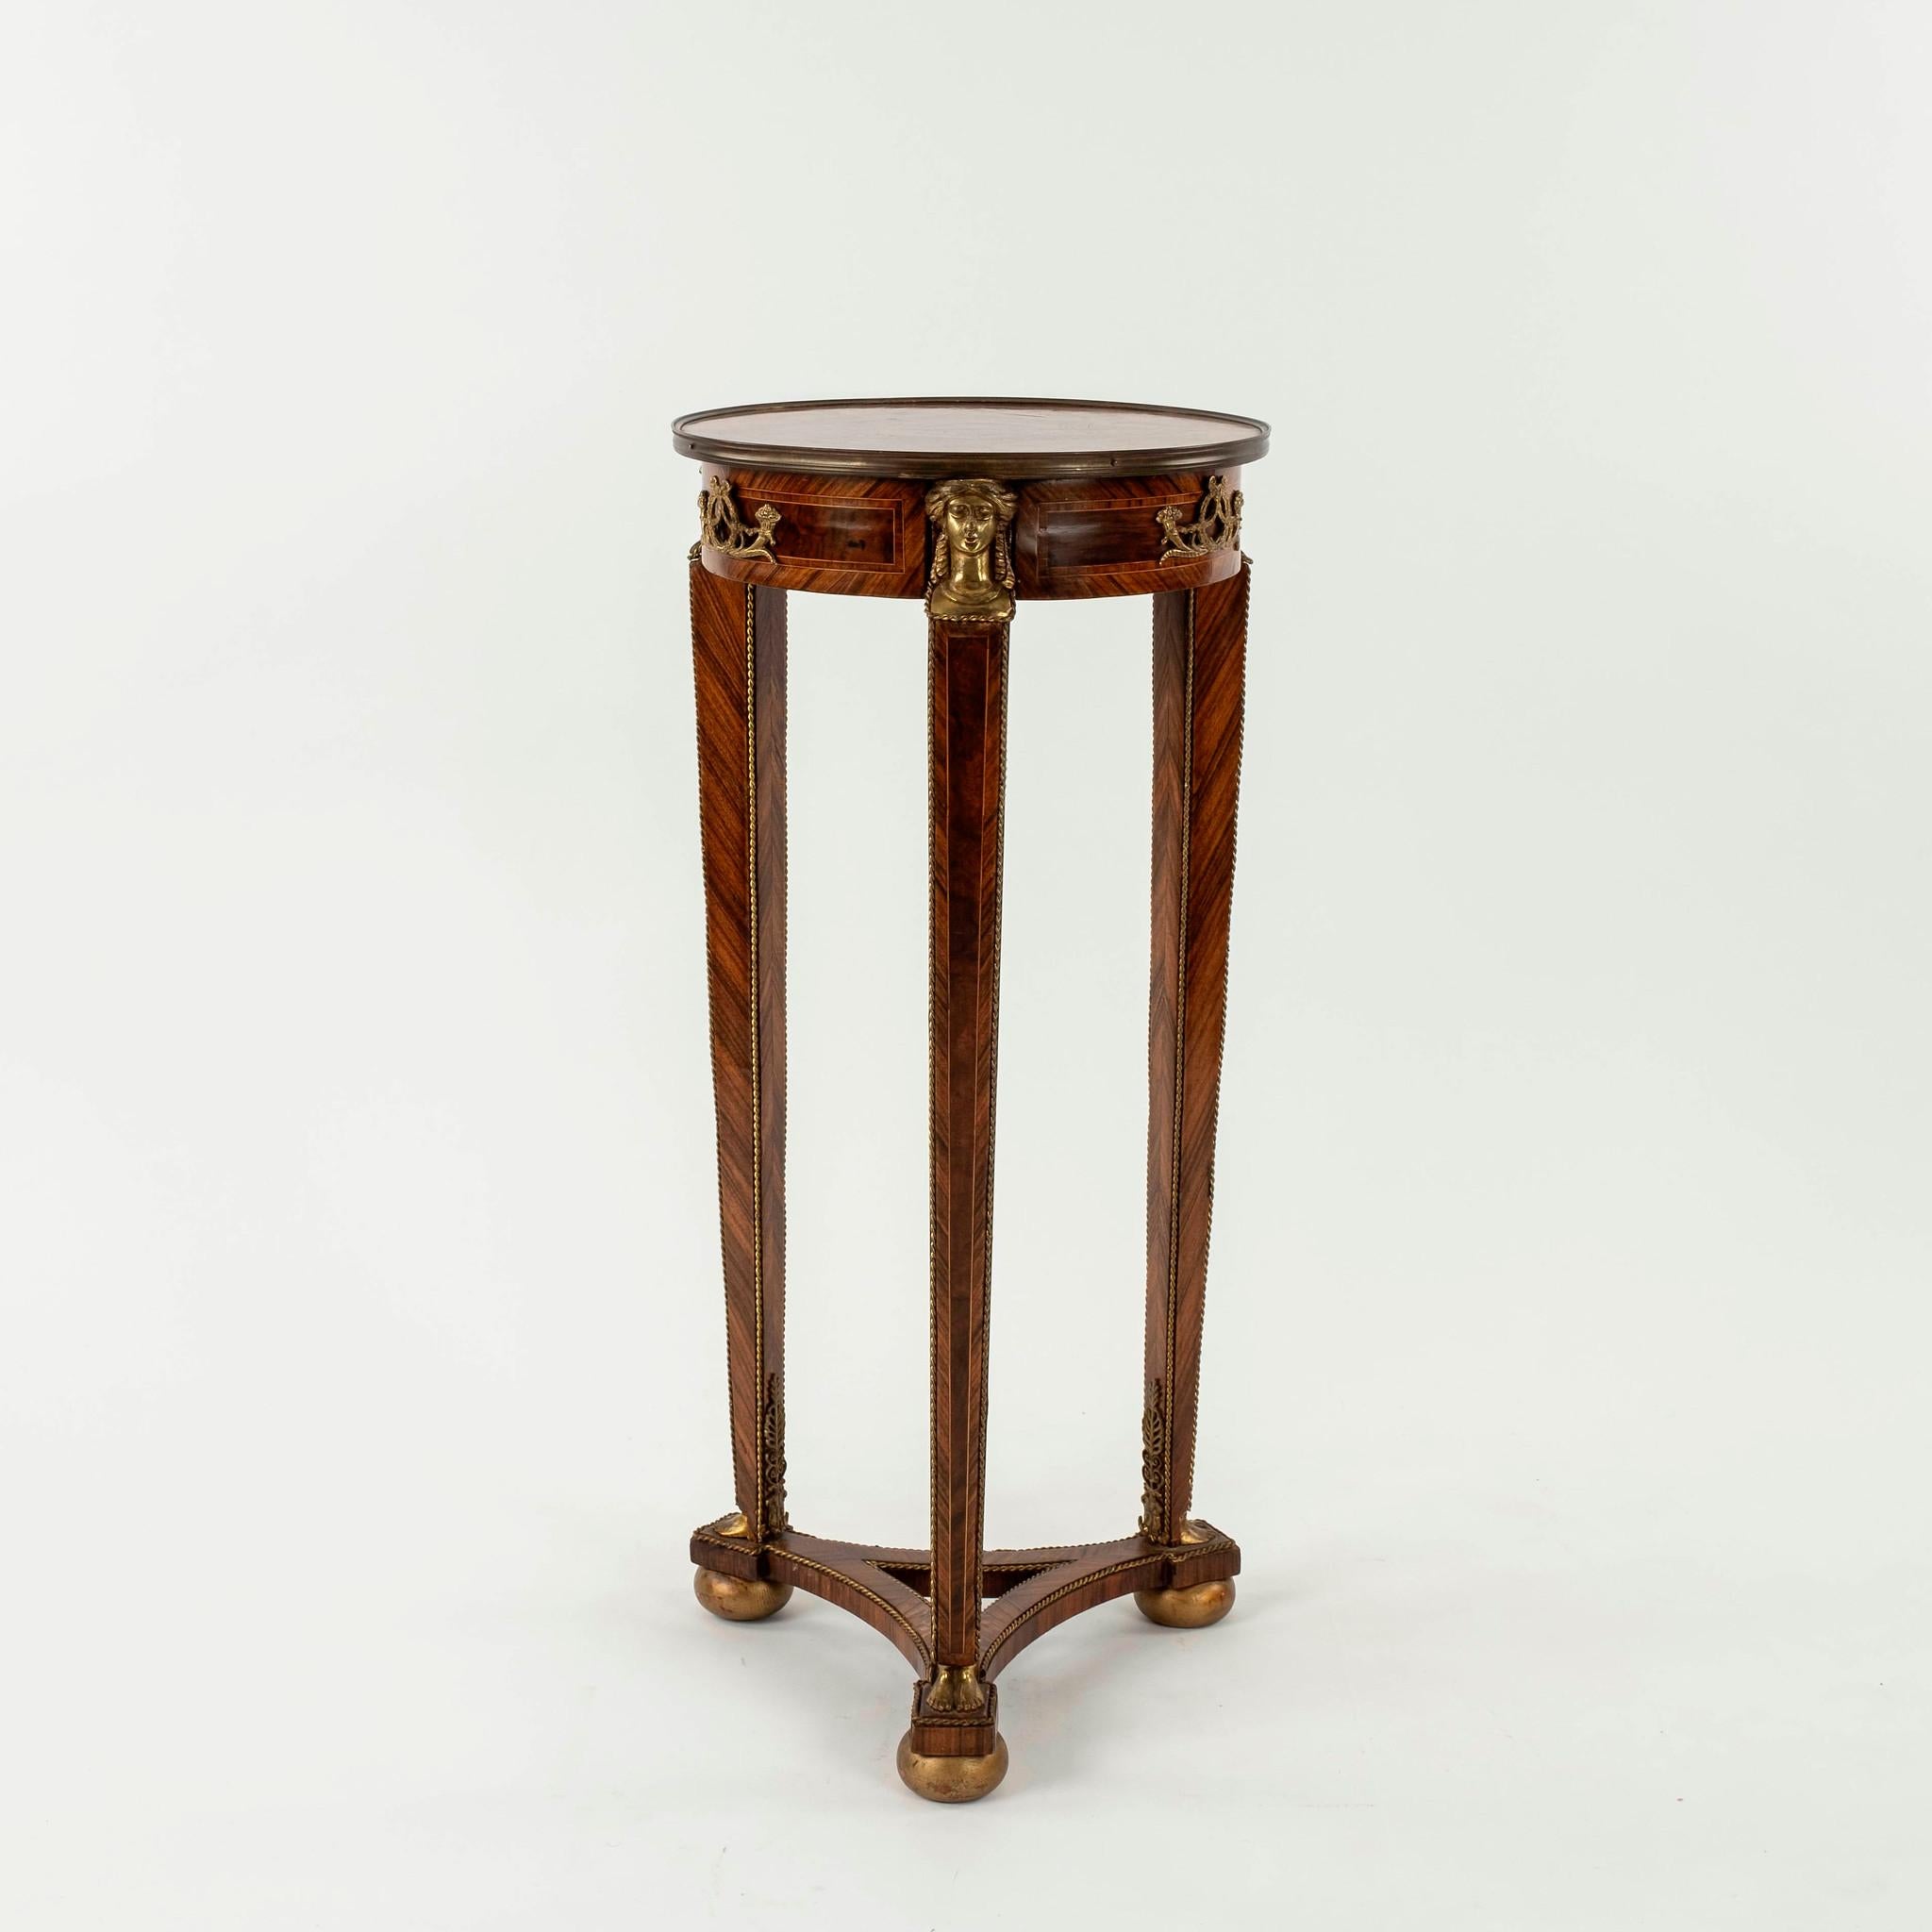 An early 20th century Empire style table stand with single drawer, lovely inlay veneers, caryatid and feet ormolu.
 